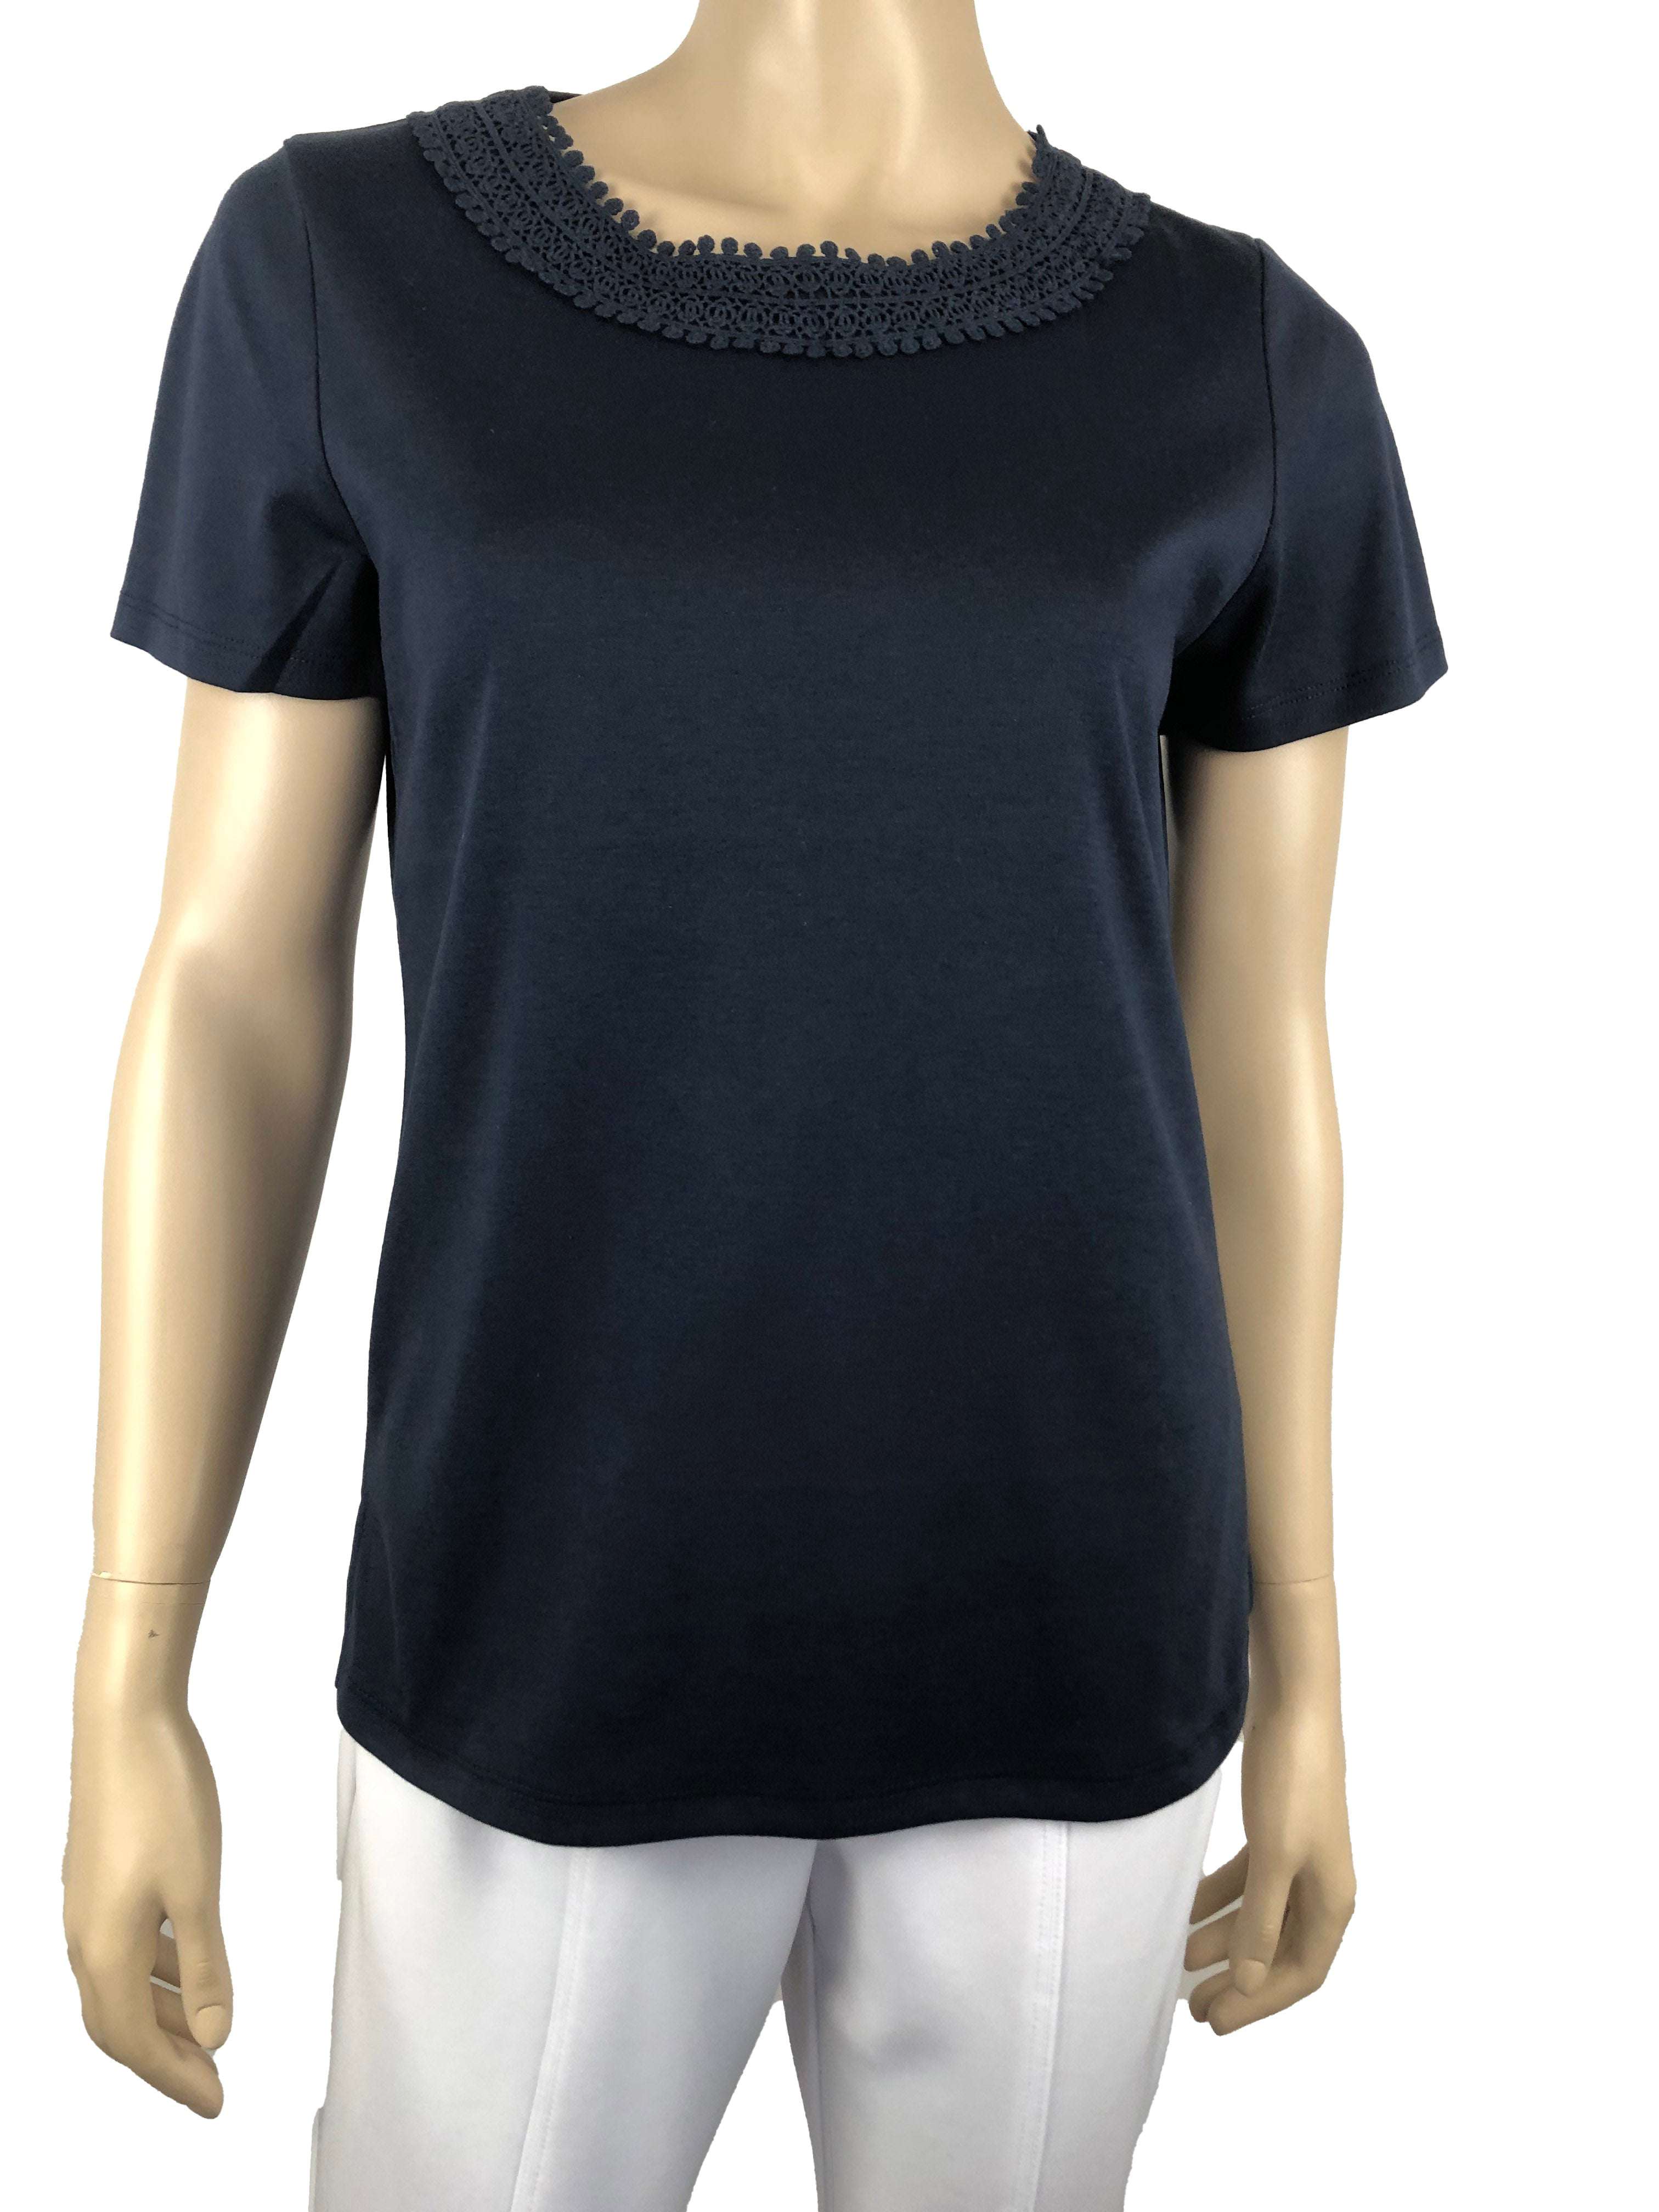 Women's Top Navy Cotton Quality Knit Top Yvonne Marie Boutiques - Yvonne Marie - Yvonne Marie